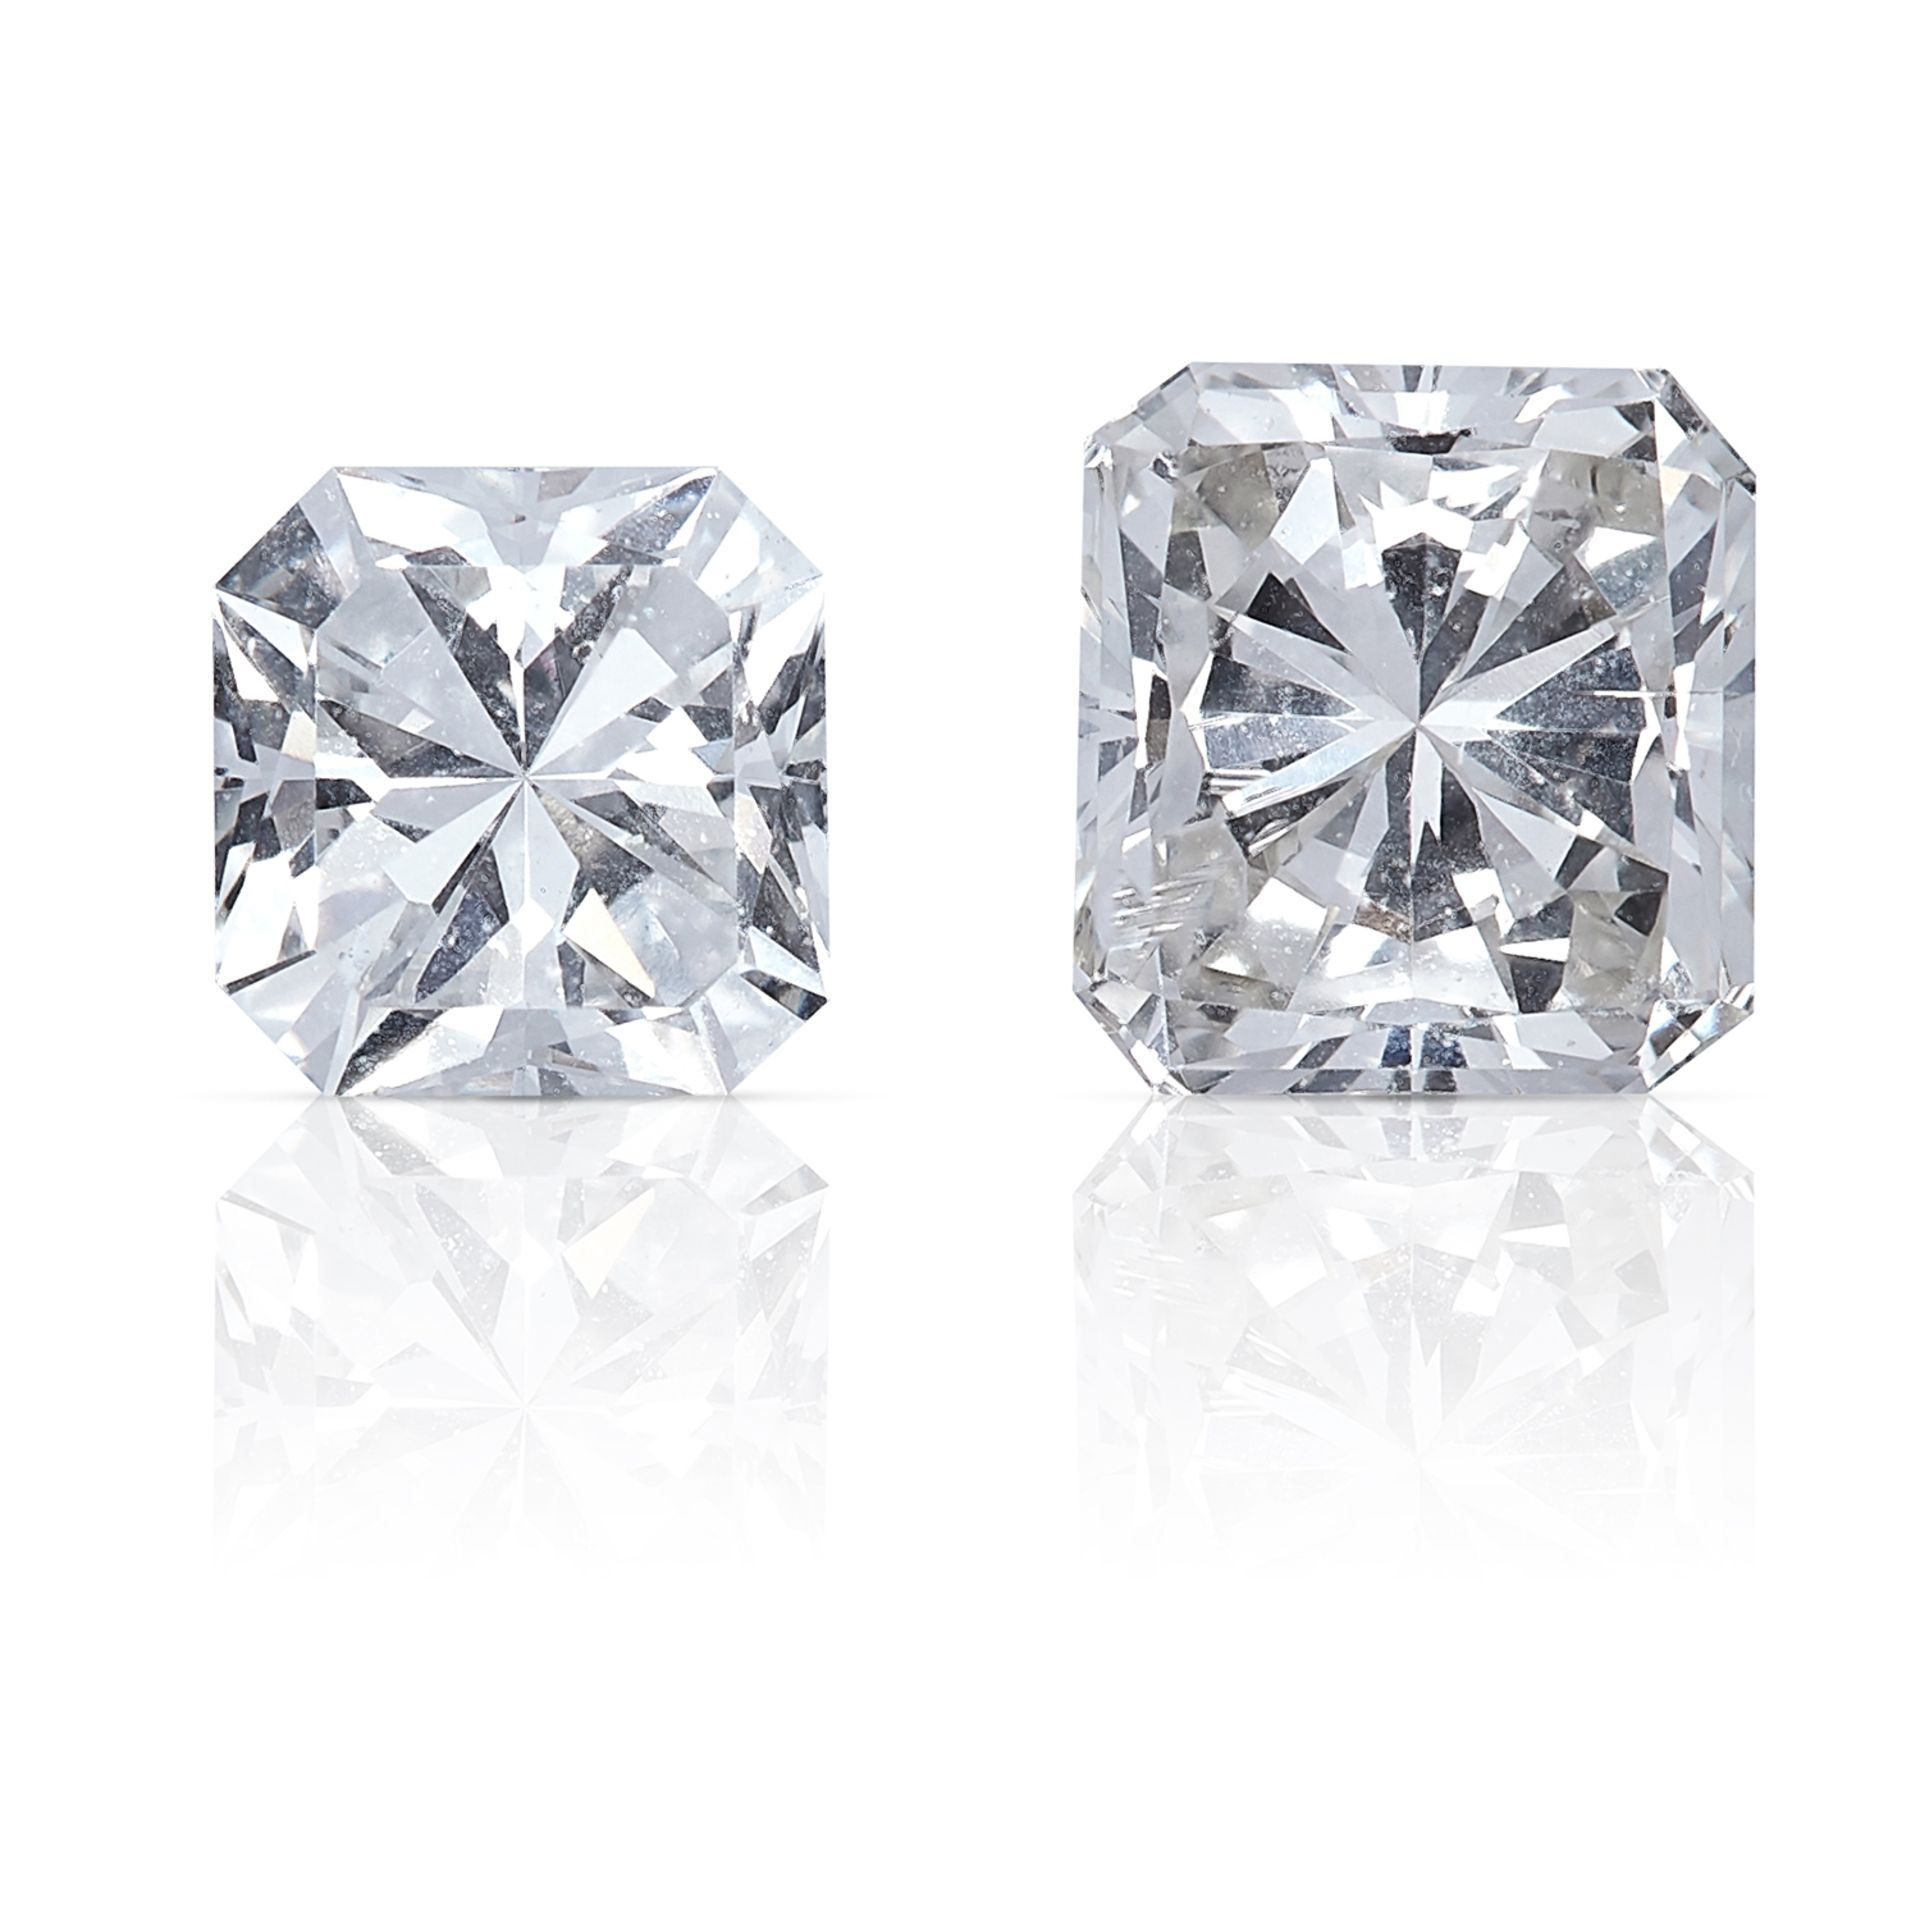 TWO SQUARE MODIFIED BRILLIANT CUT DIAMONDS, TOTALLING 0.71cts, UNMOUNTED.